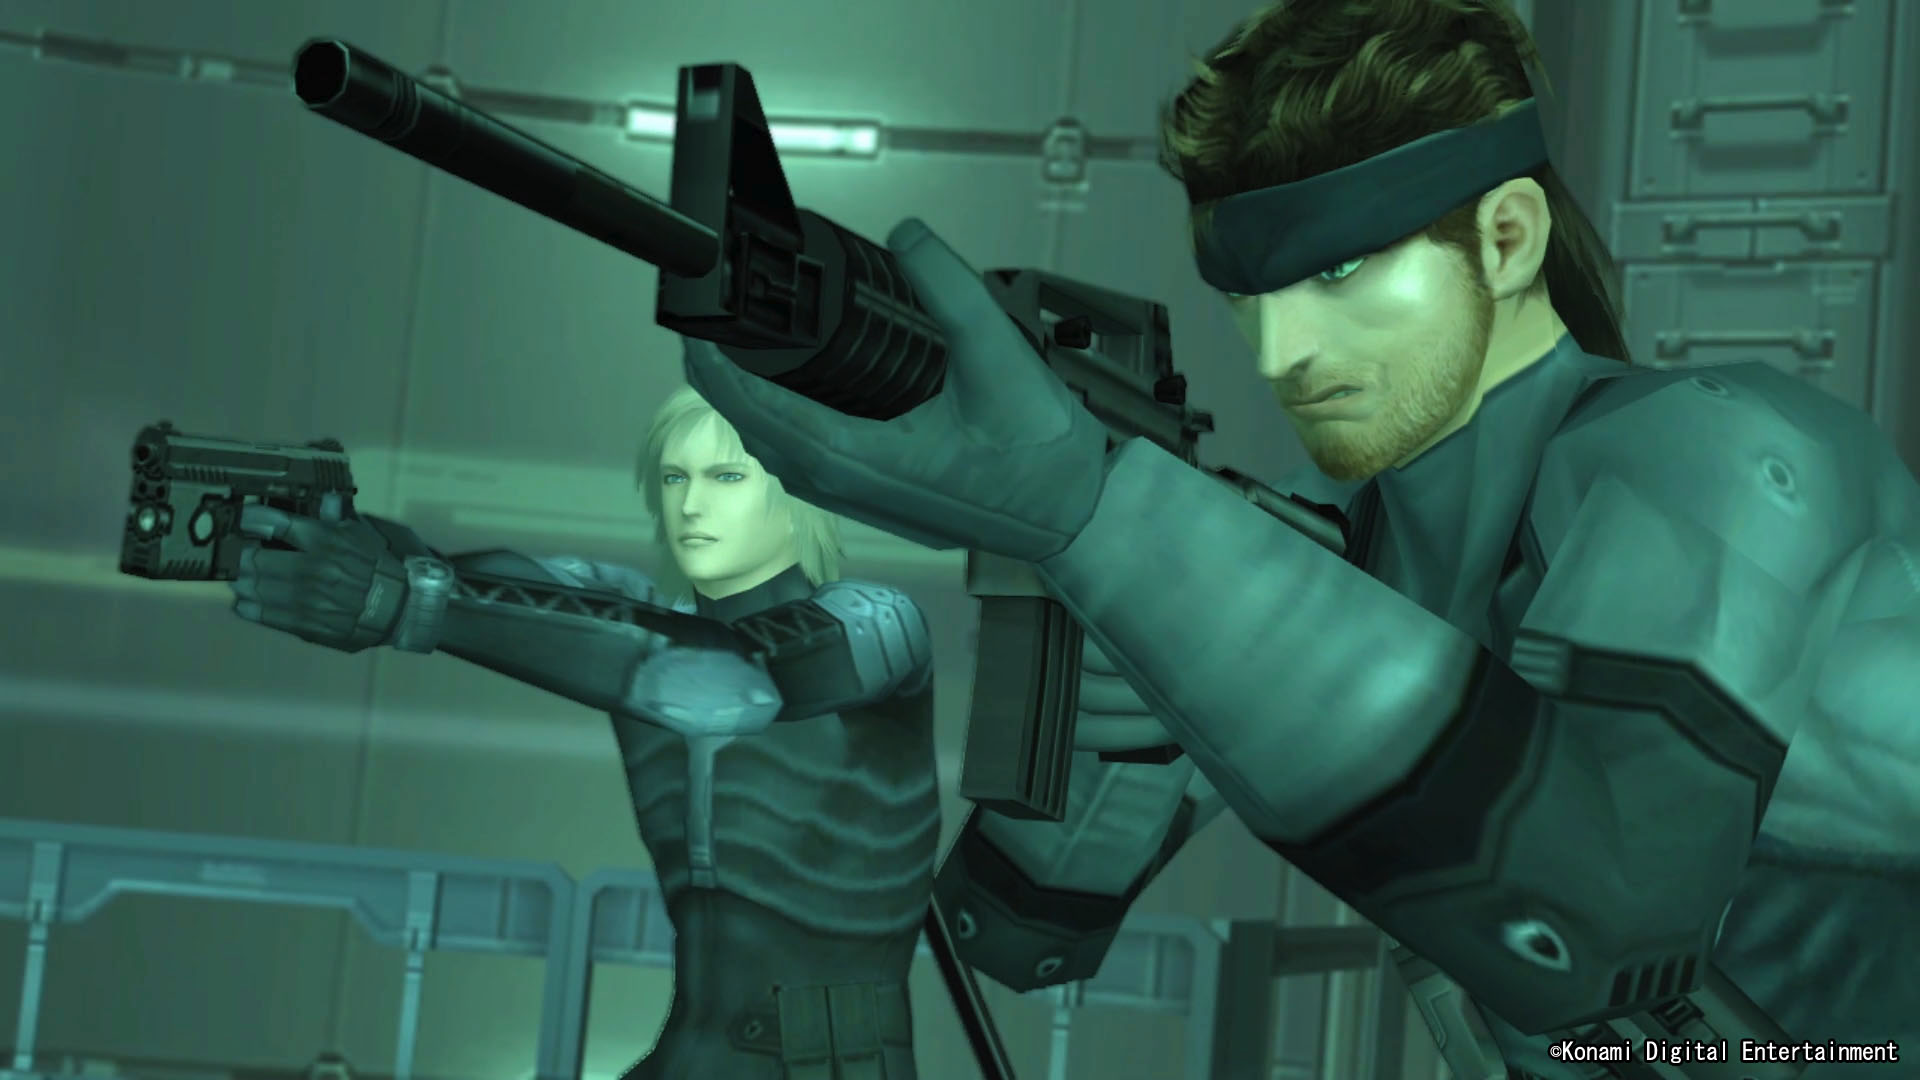 New Metal Gear Solid officially announced by Konami